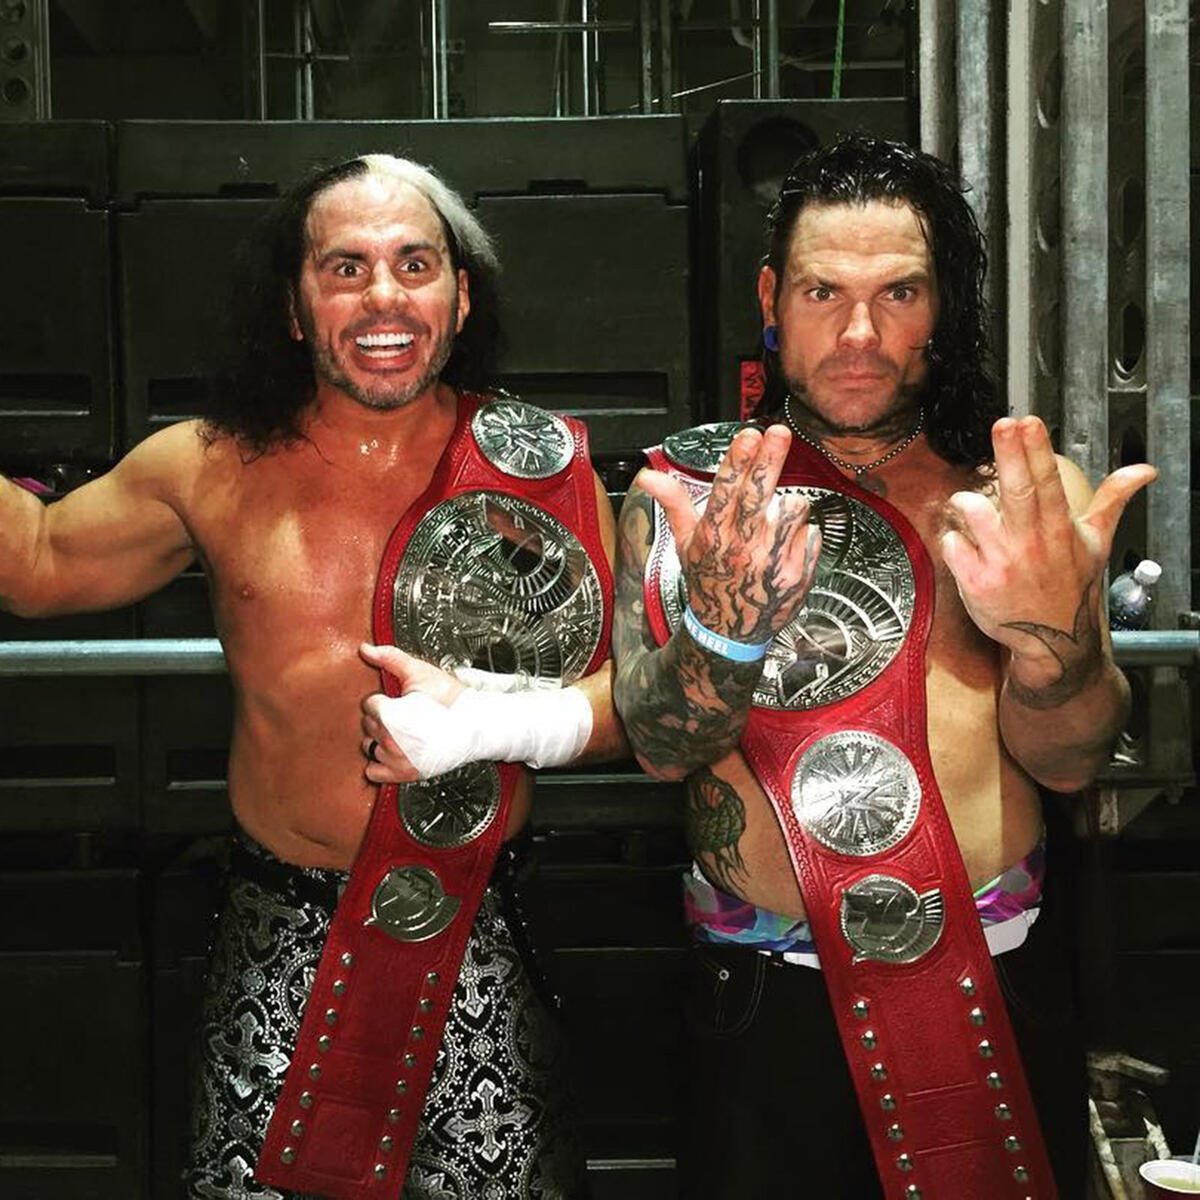 The 50 best Instagram pics from WrestleMania 33 | WWE